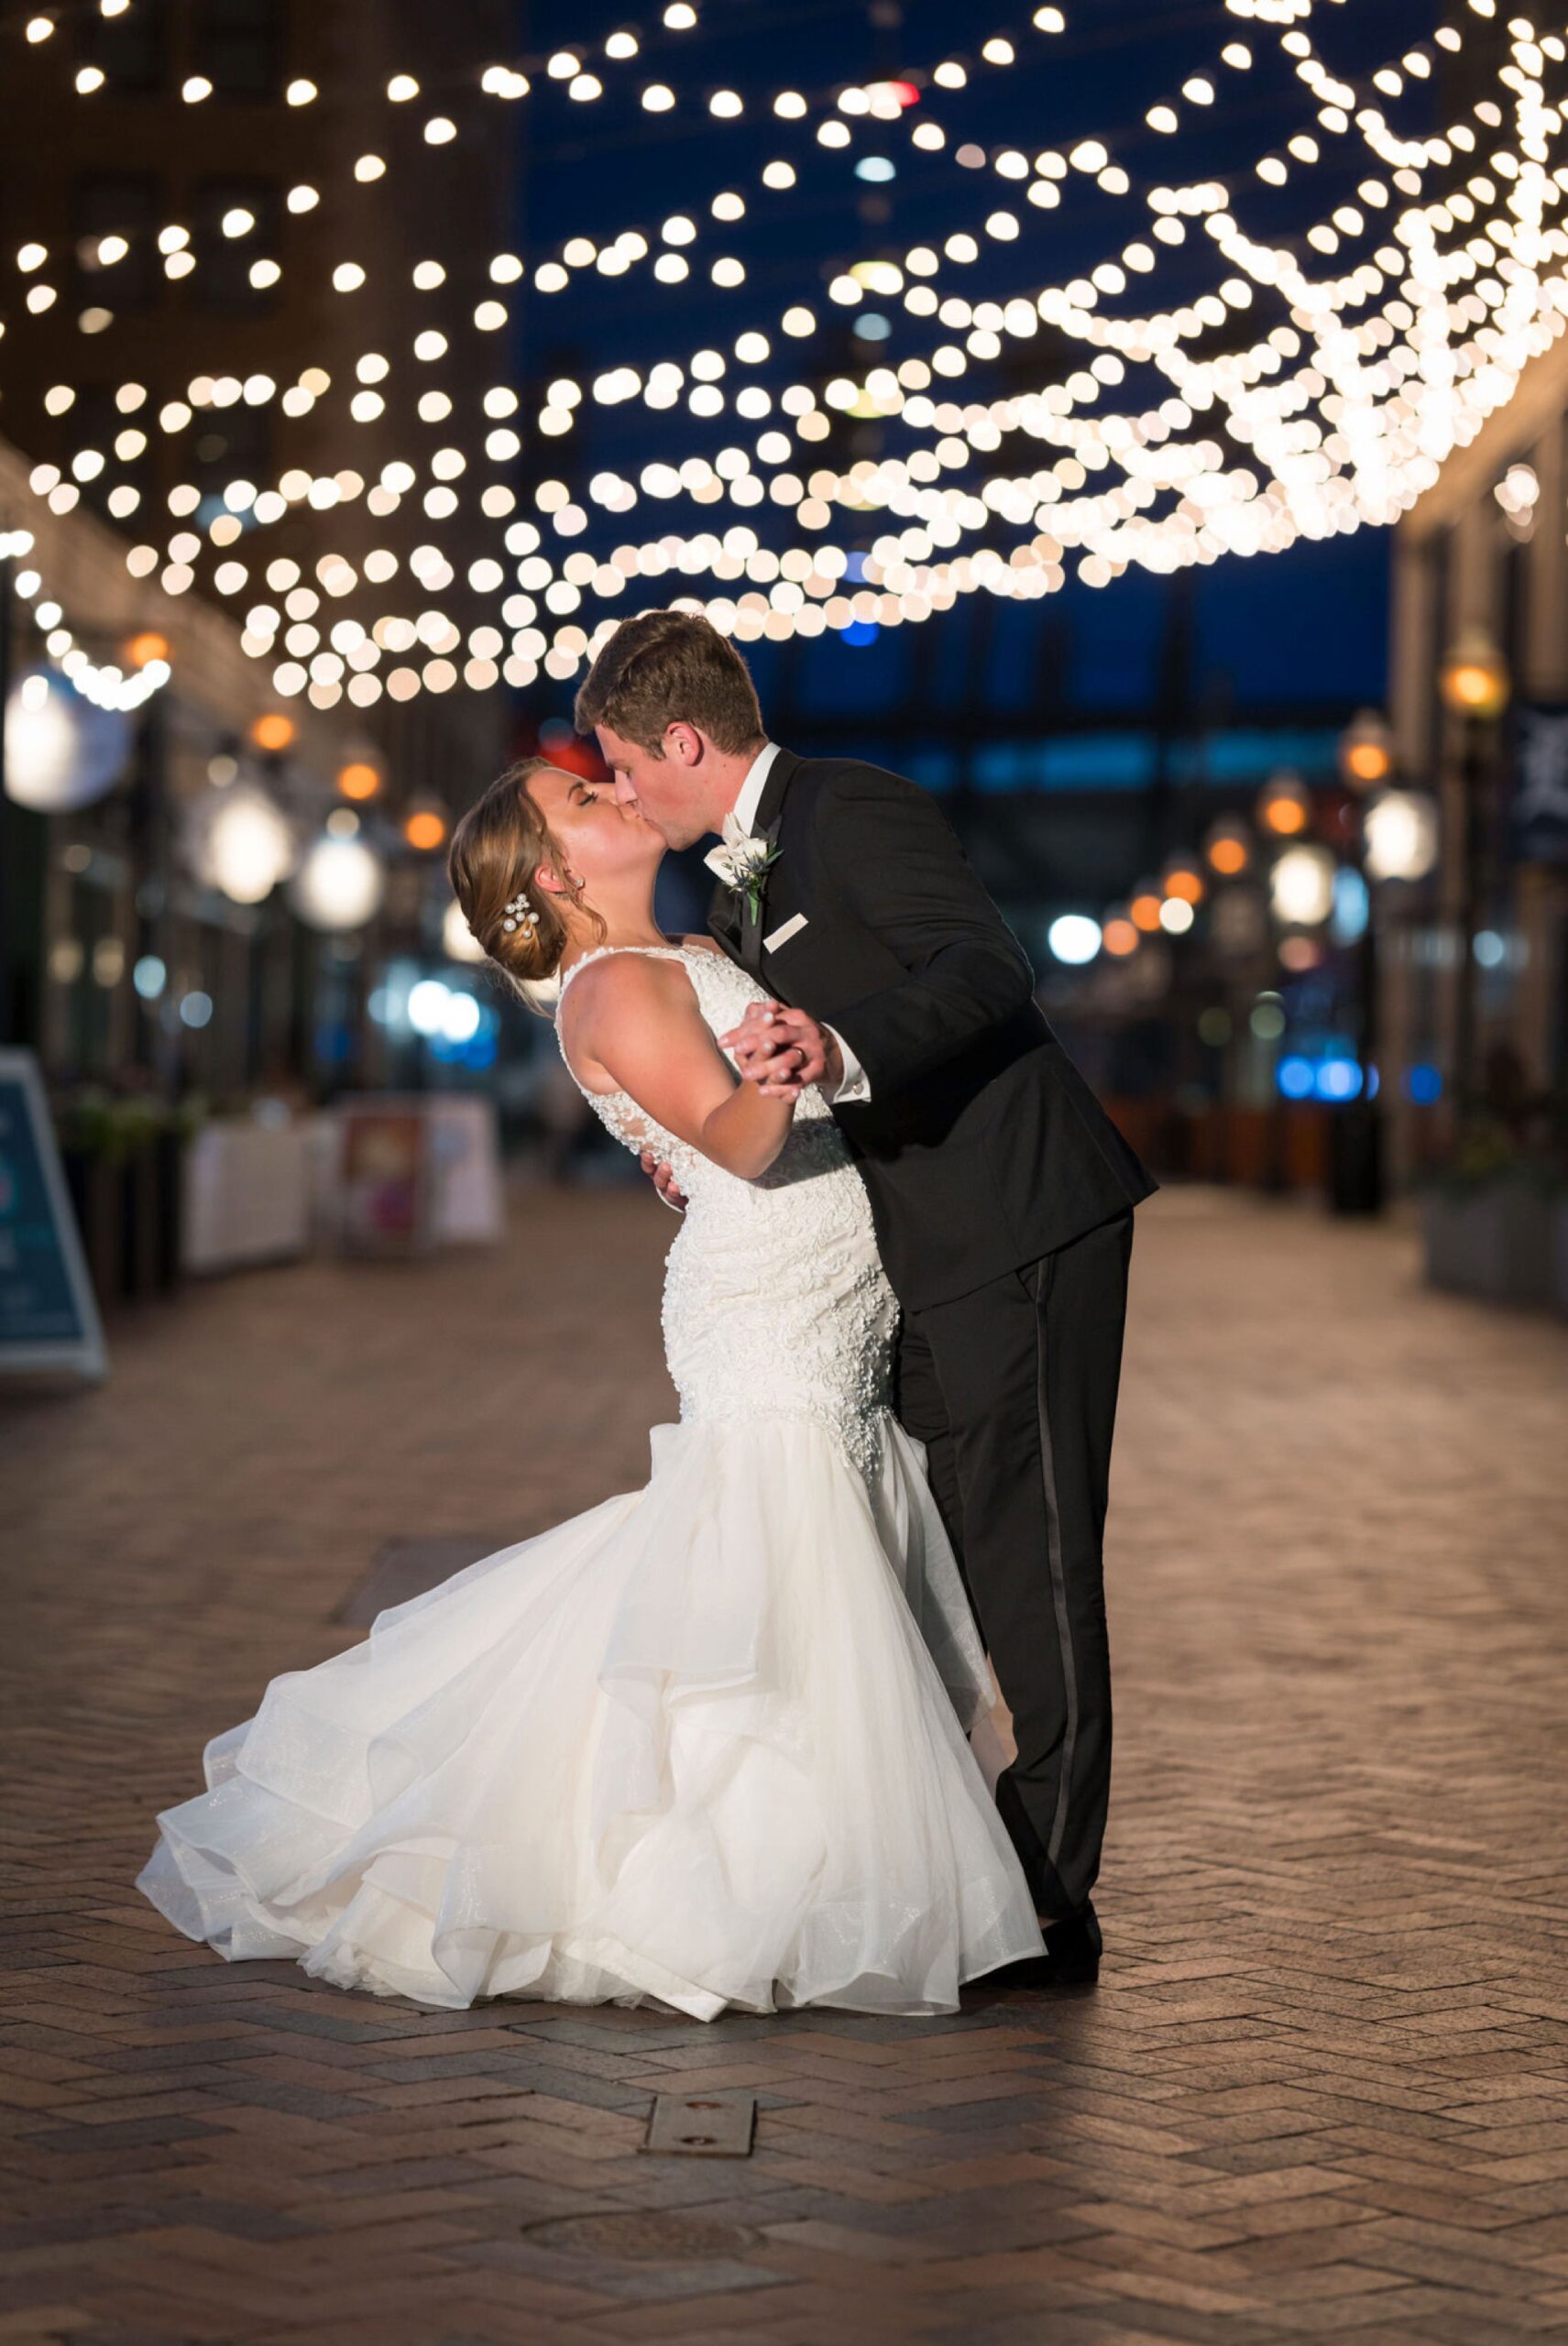 Newlyweds kiss under city lights in downtown Detroit.  